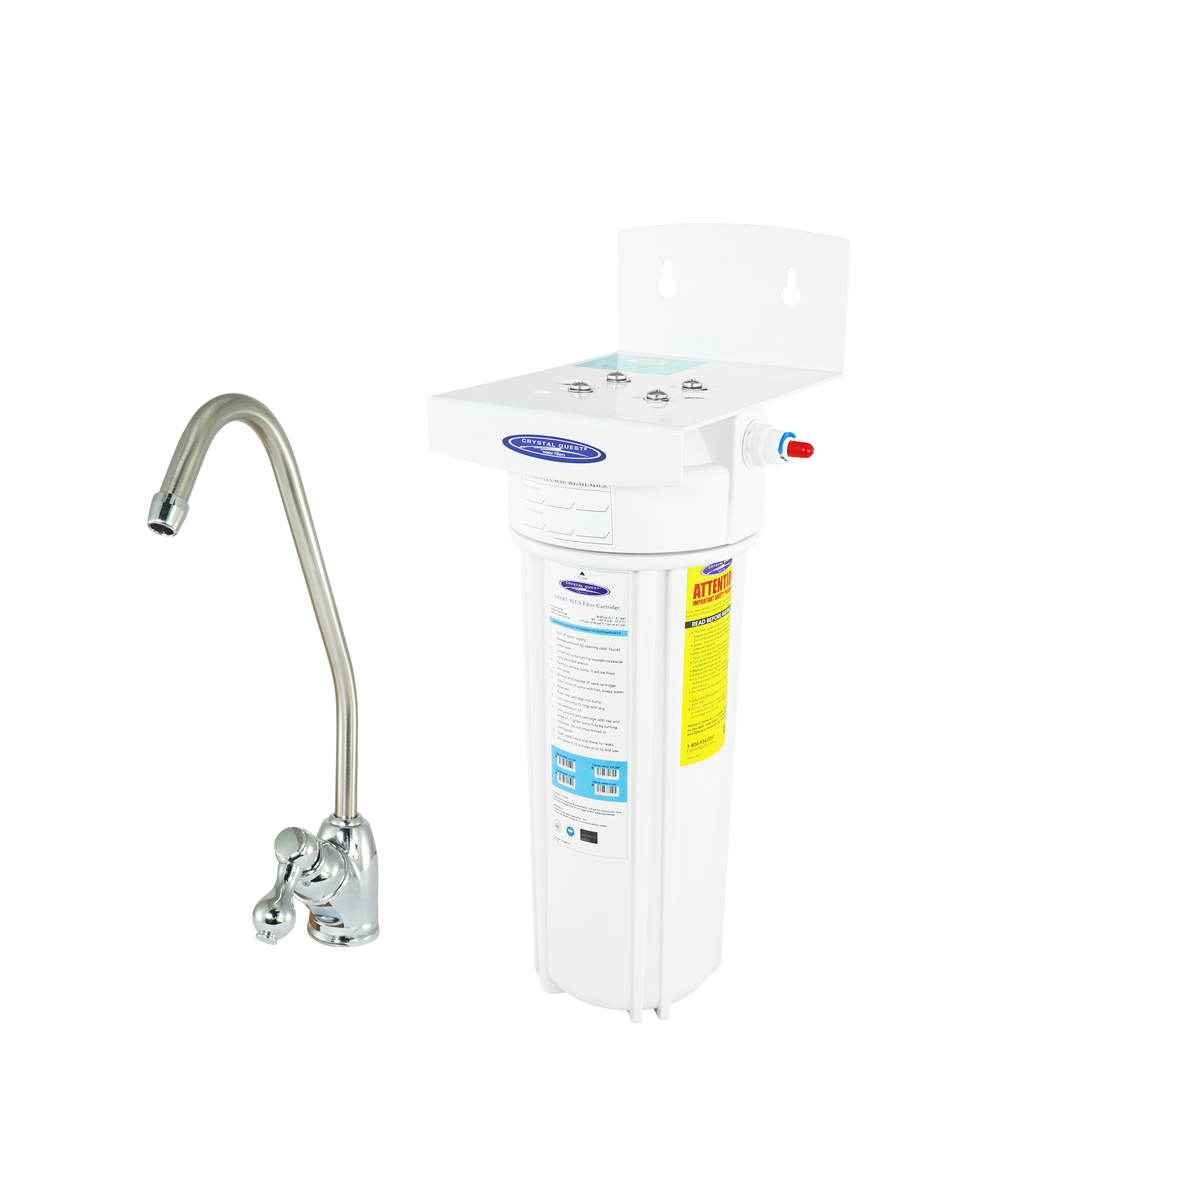 Single SMART Under Sink Water Filter System - Under Sink Water Filters - Crystal Quest